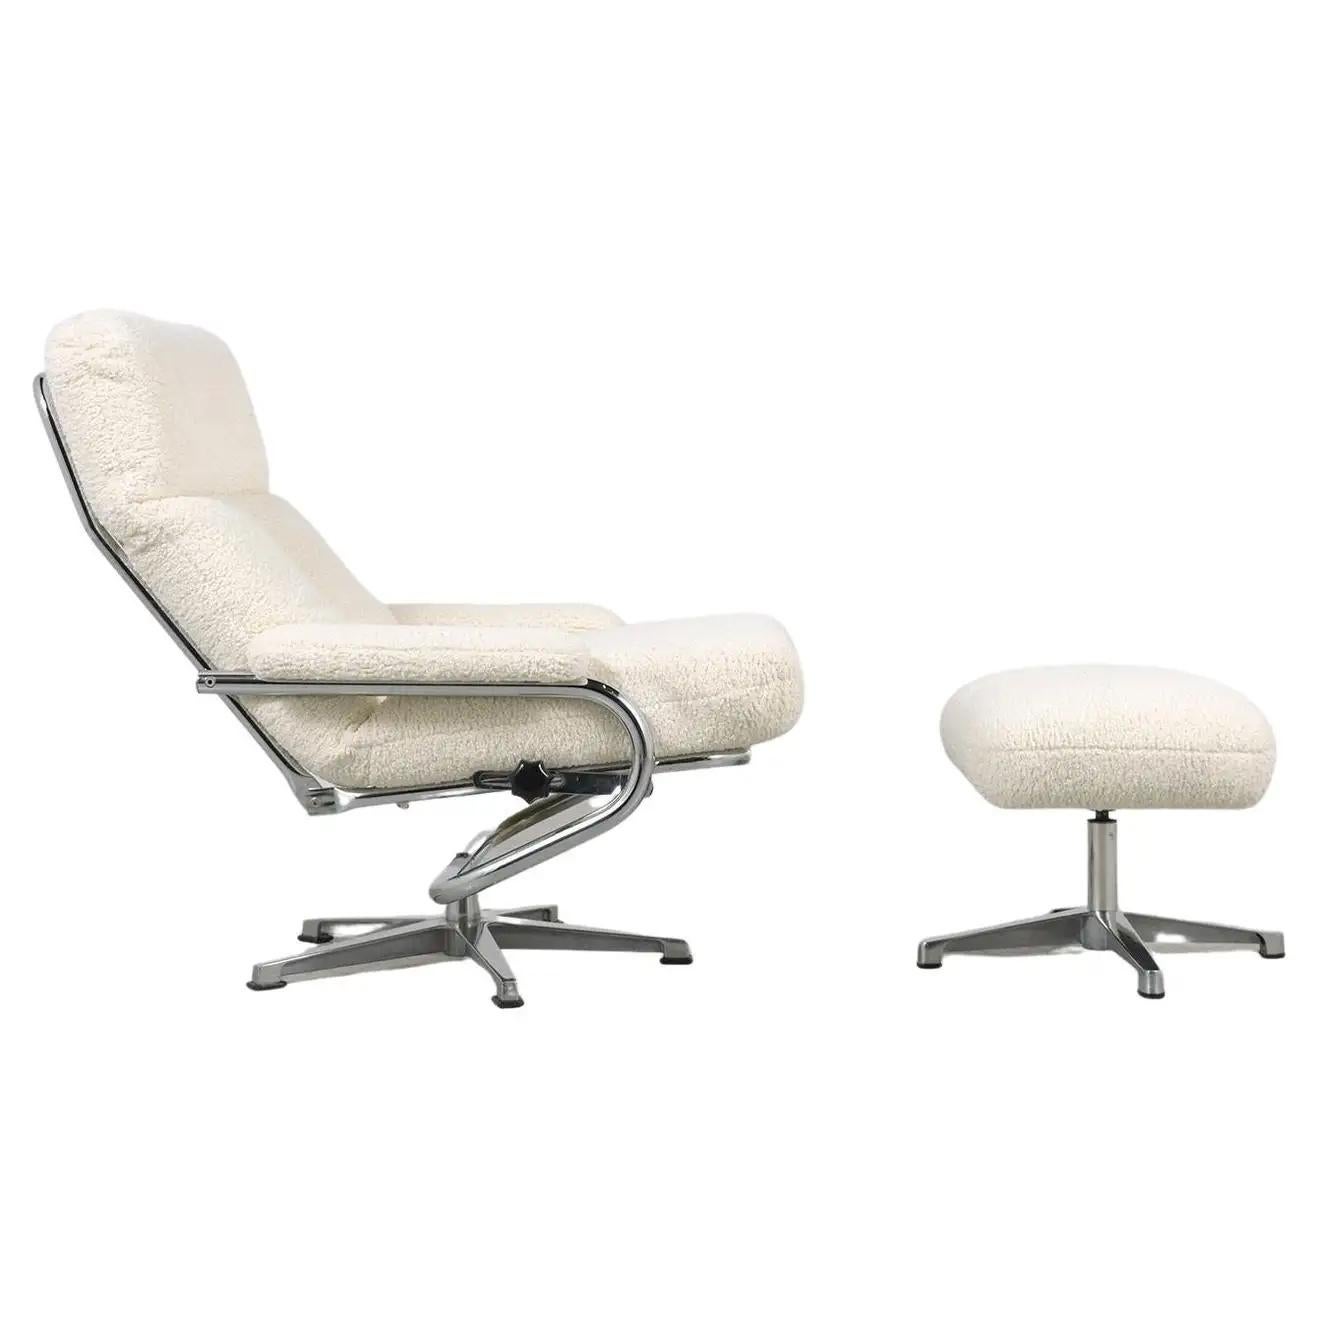 Step into the stylish world of mid-century modern design with our Chrome-Plated Recliner Chair and Ottoman set, a tribute to the iconic aesthetics of the 1970s, seamlessly blended with contemporary comfort. This duo is expertly crafted from tubular